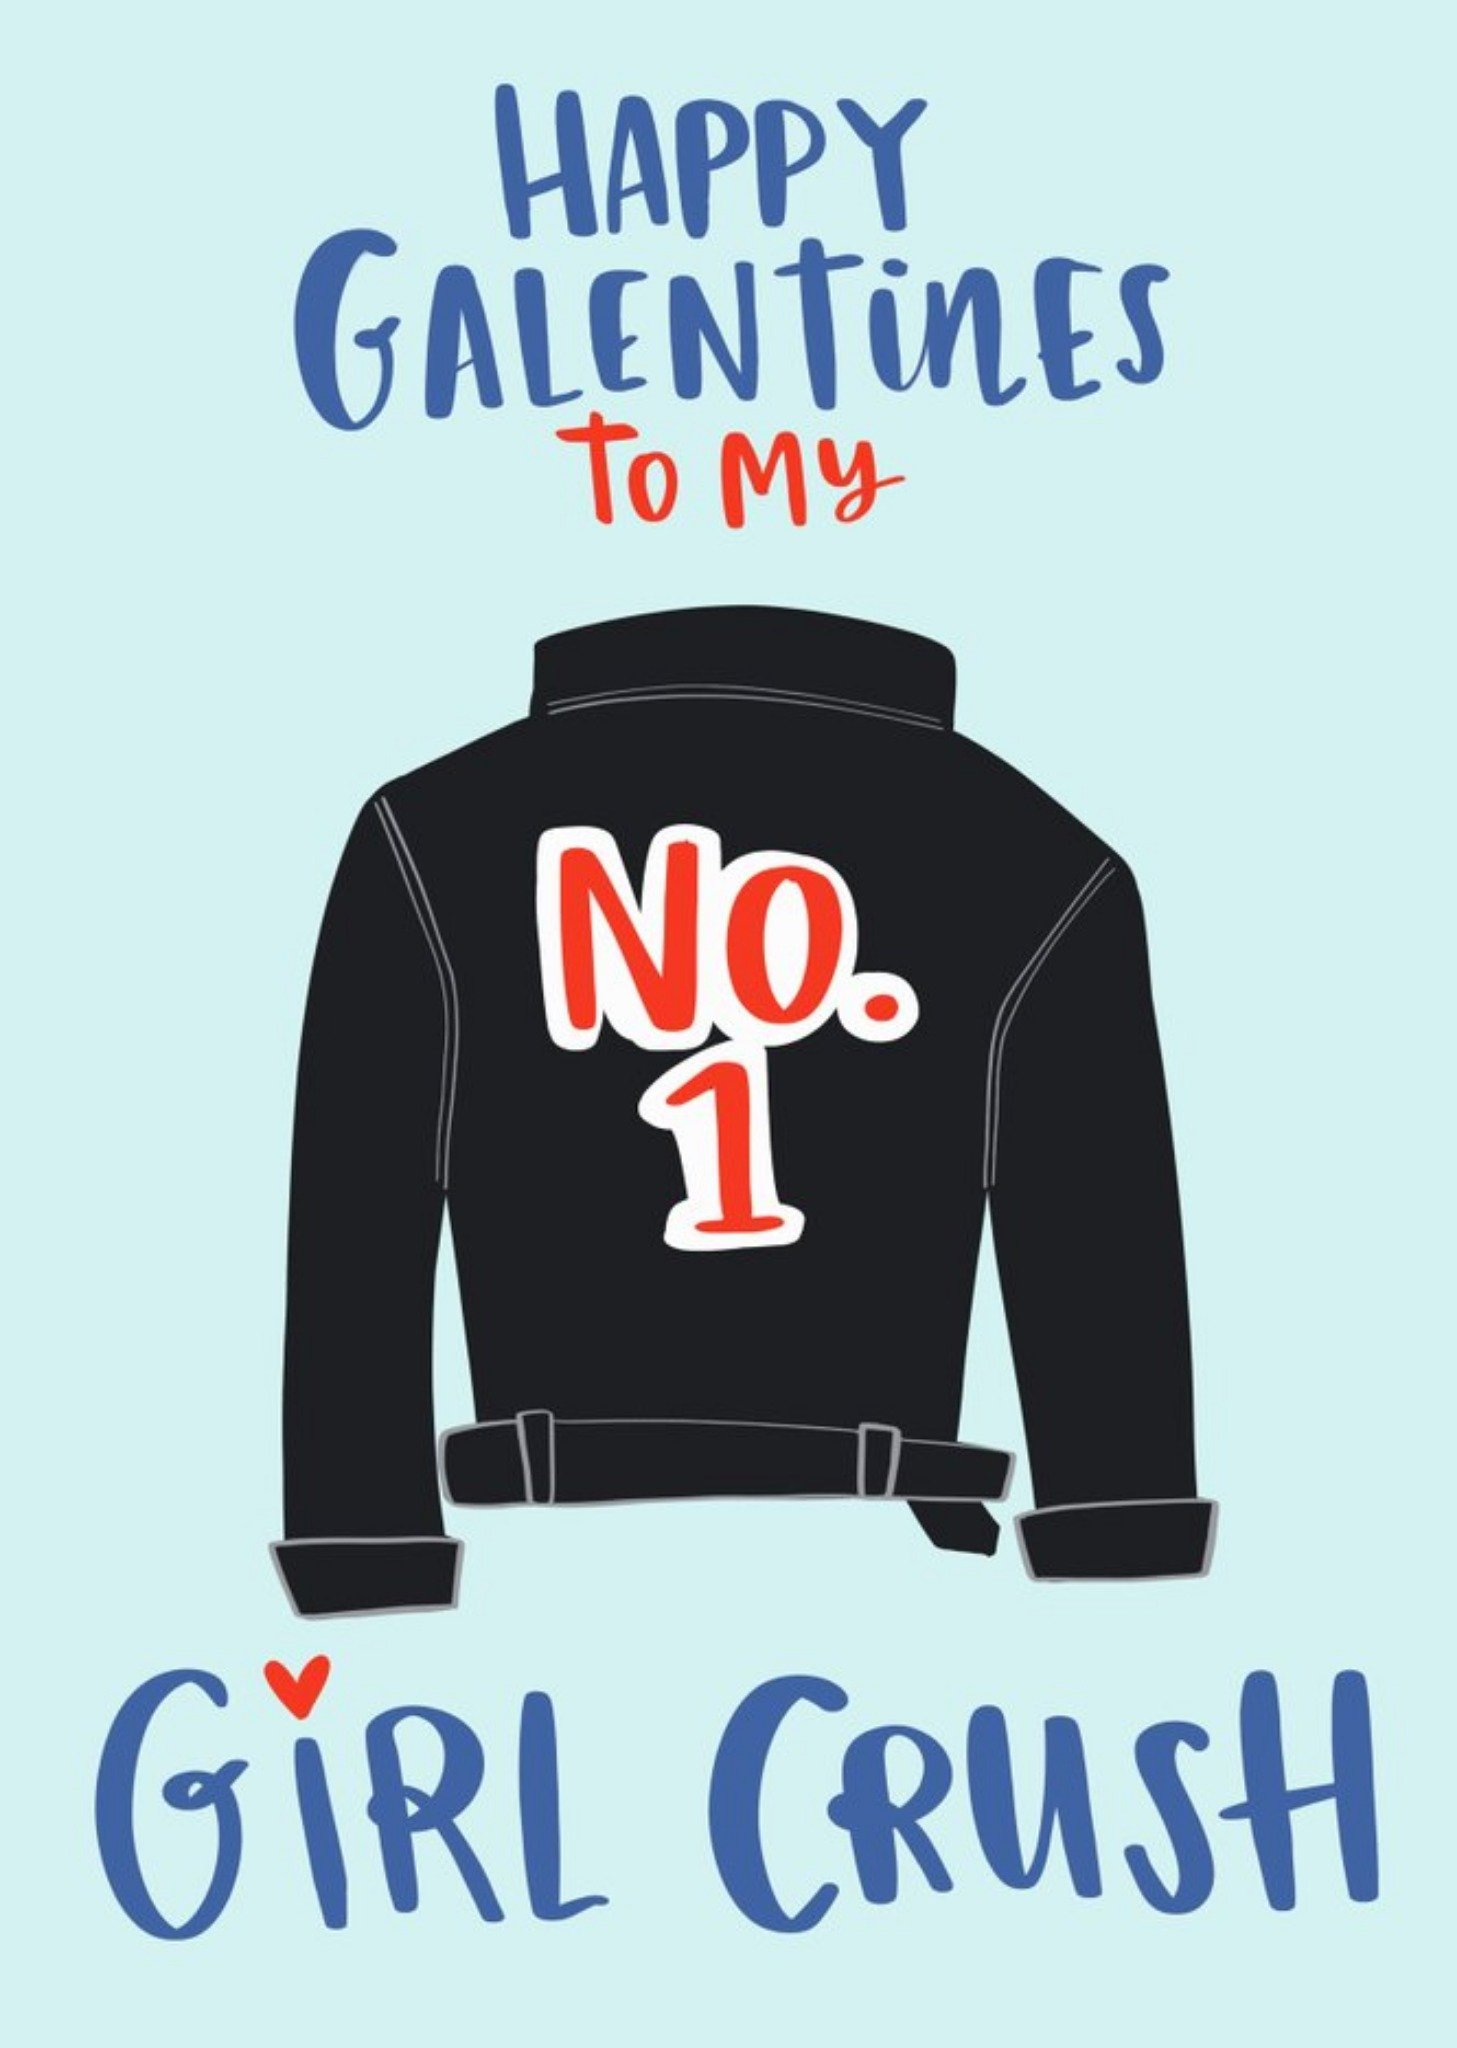 Moonpig To My No 1 Girl Crush Happy Galentines Day Valentines Day Card, Large